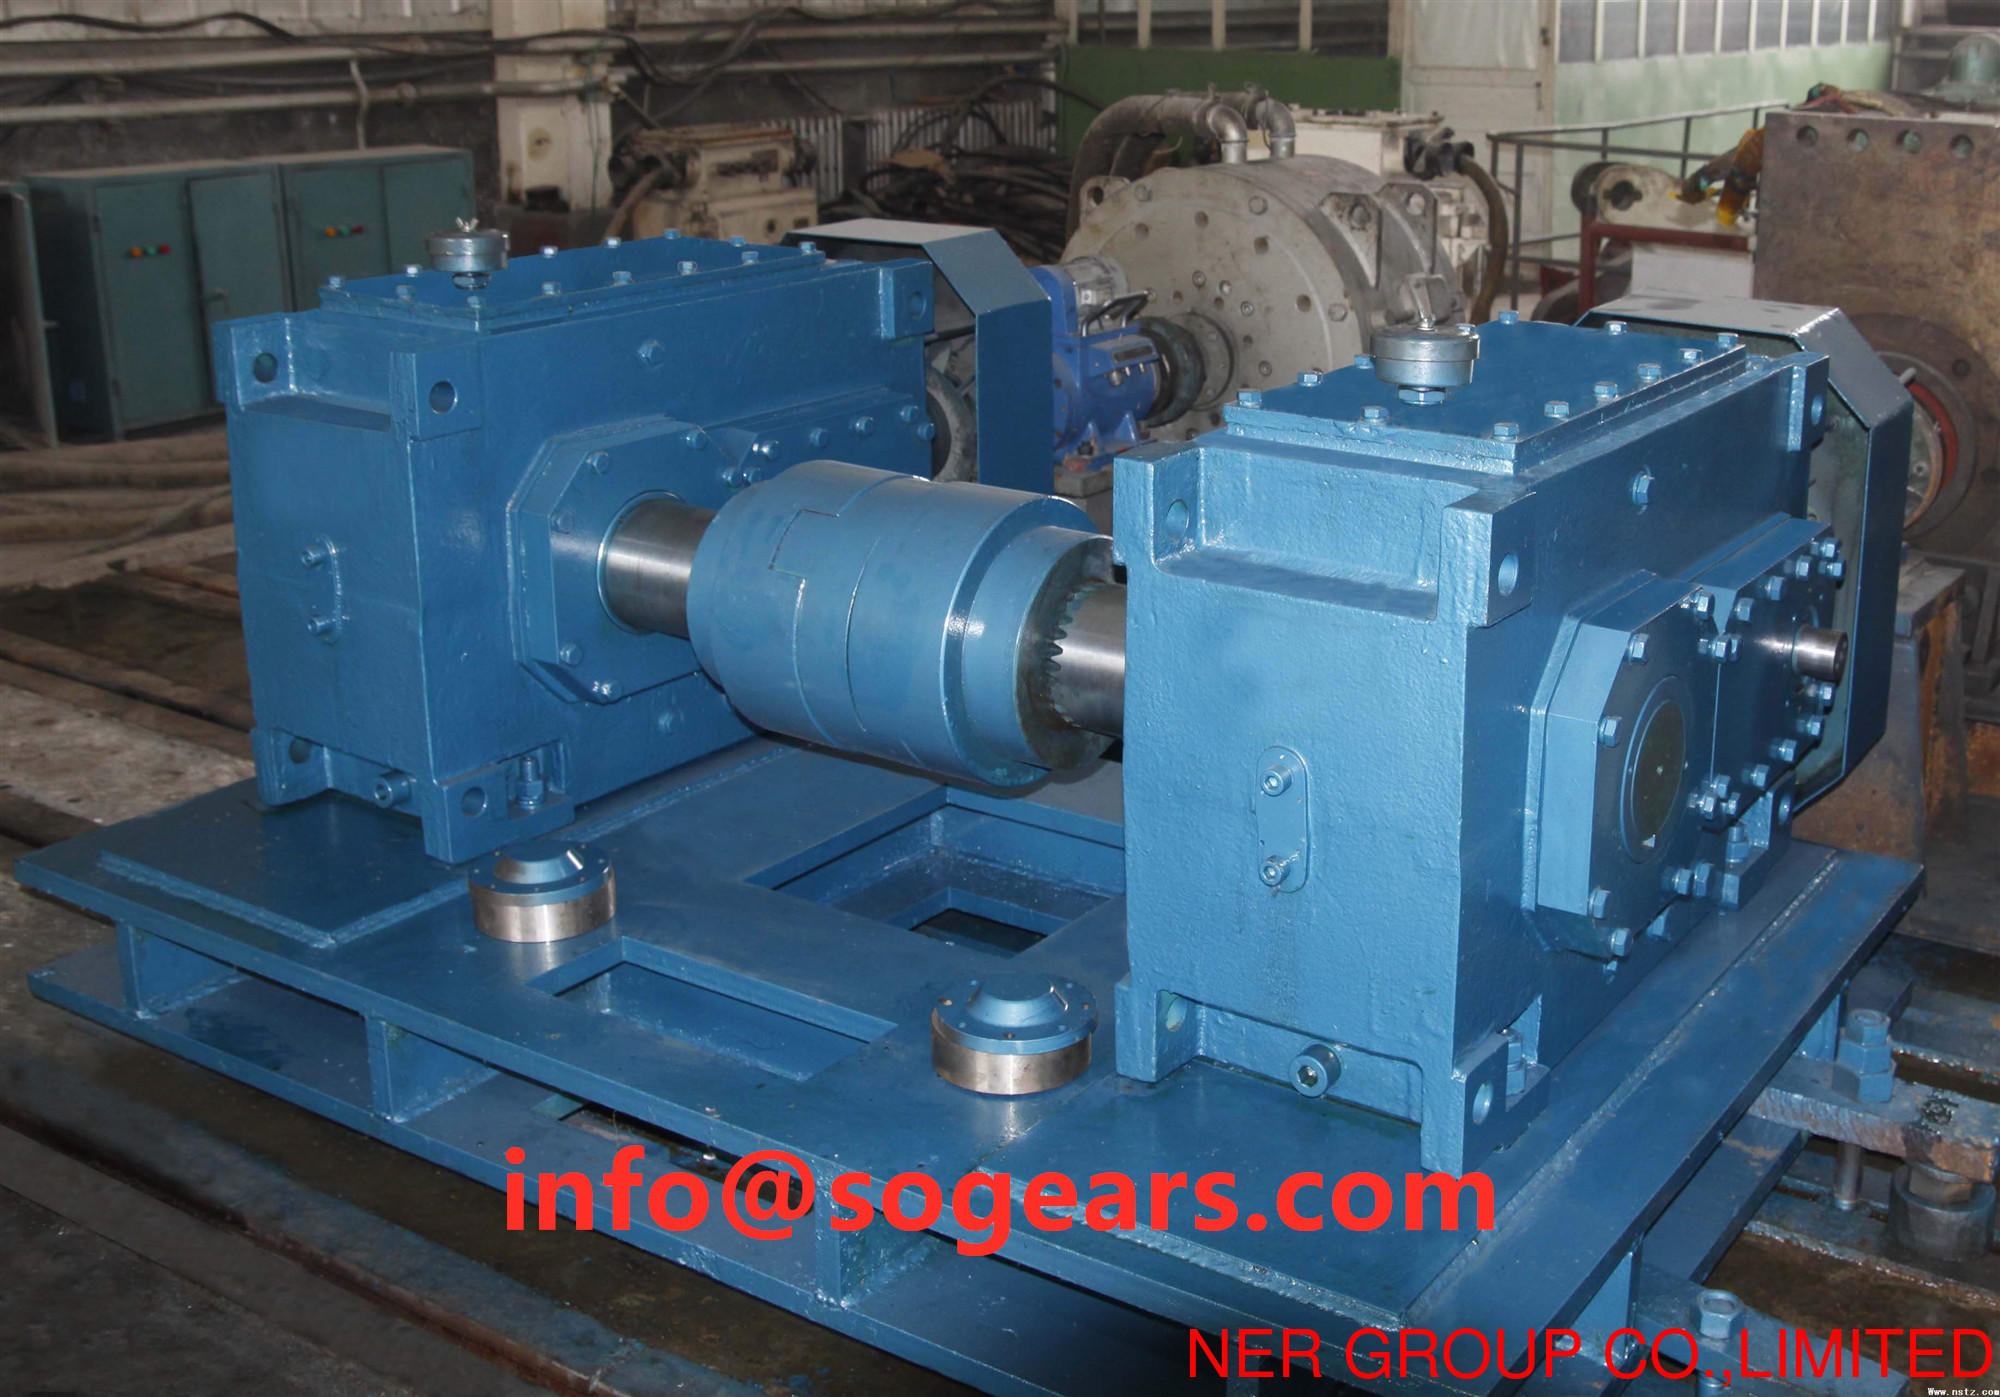 Helical gearbox